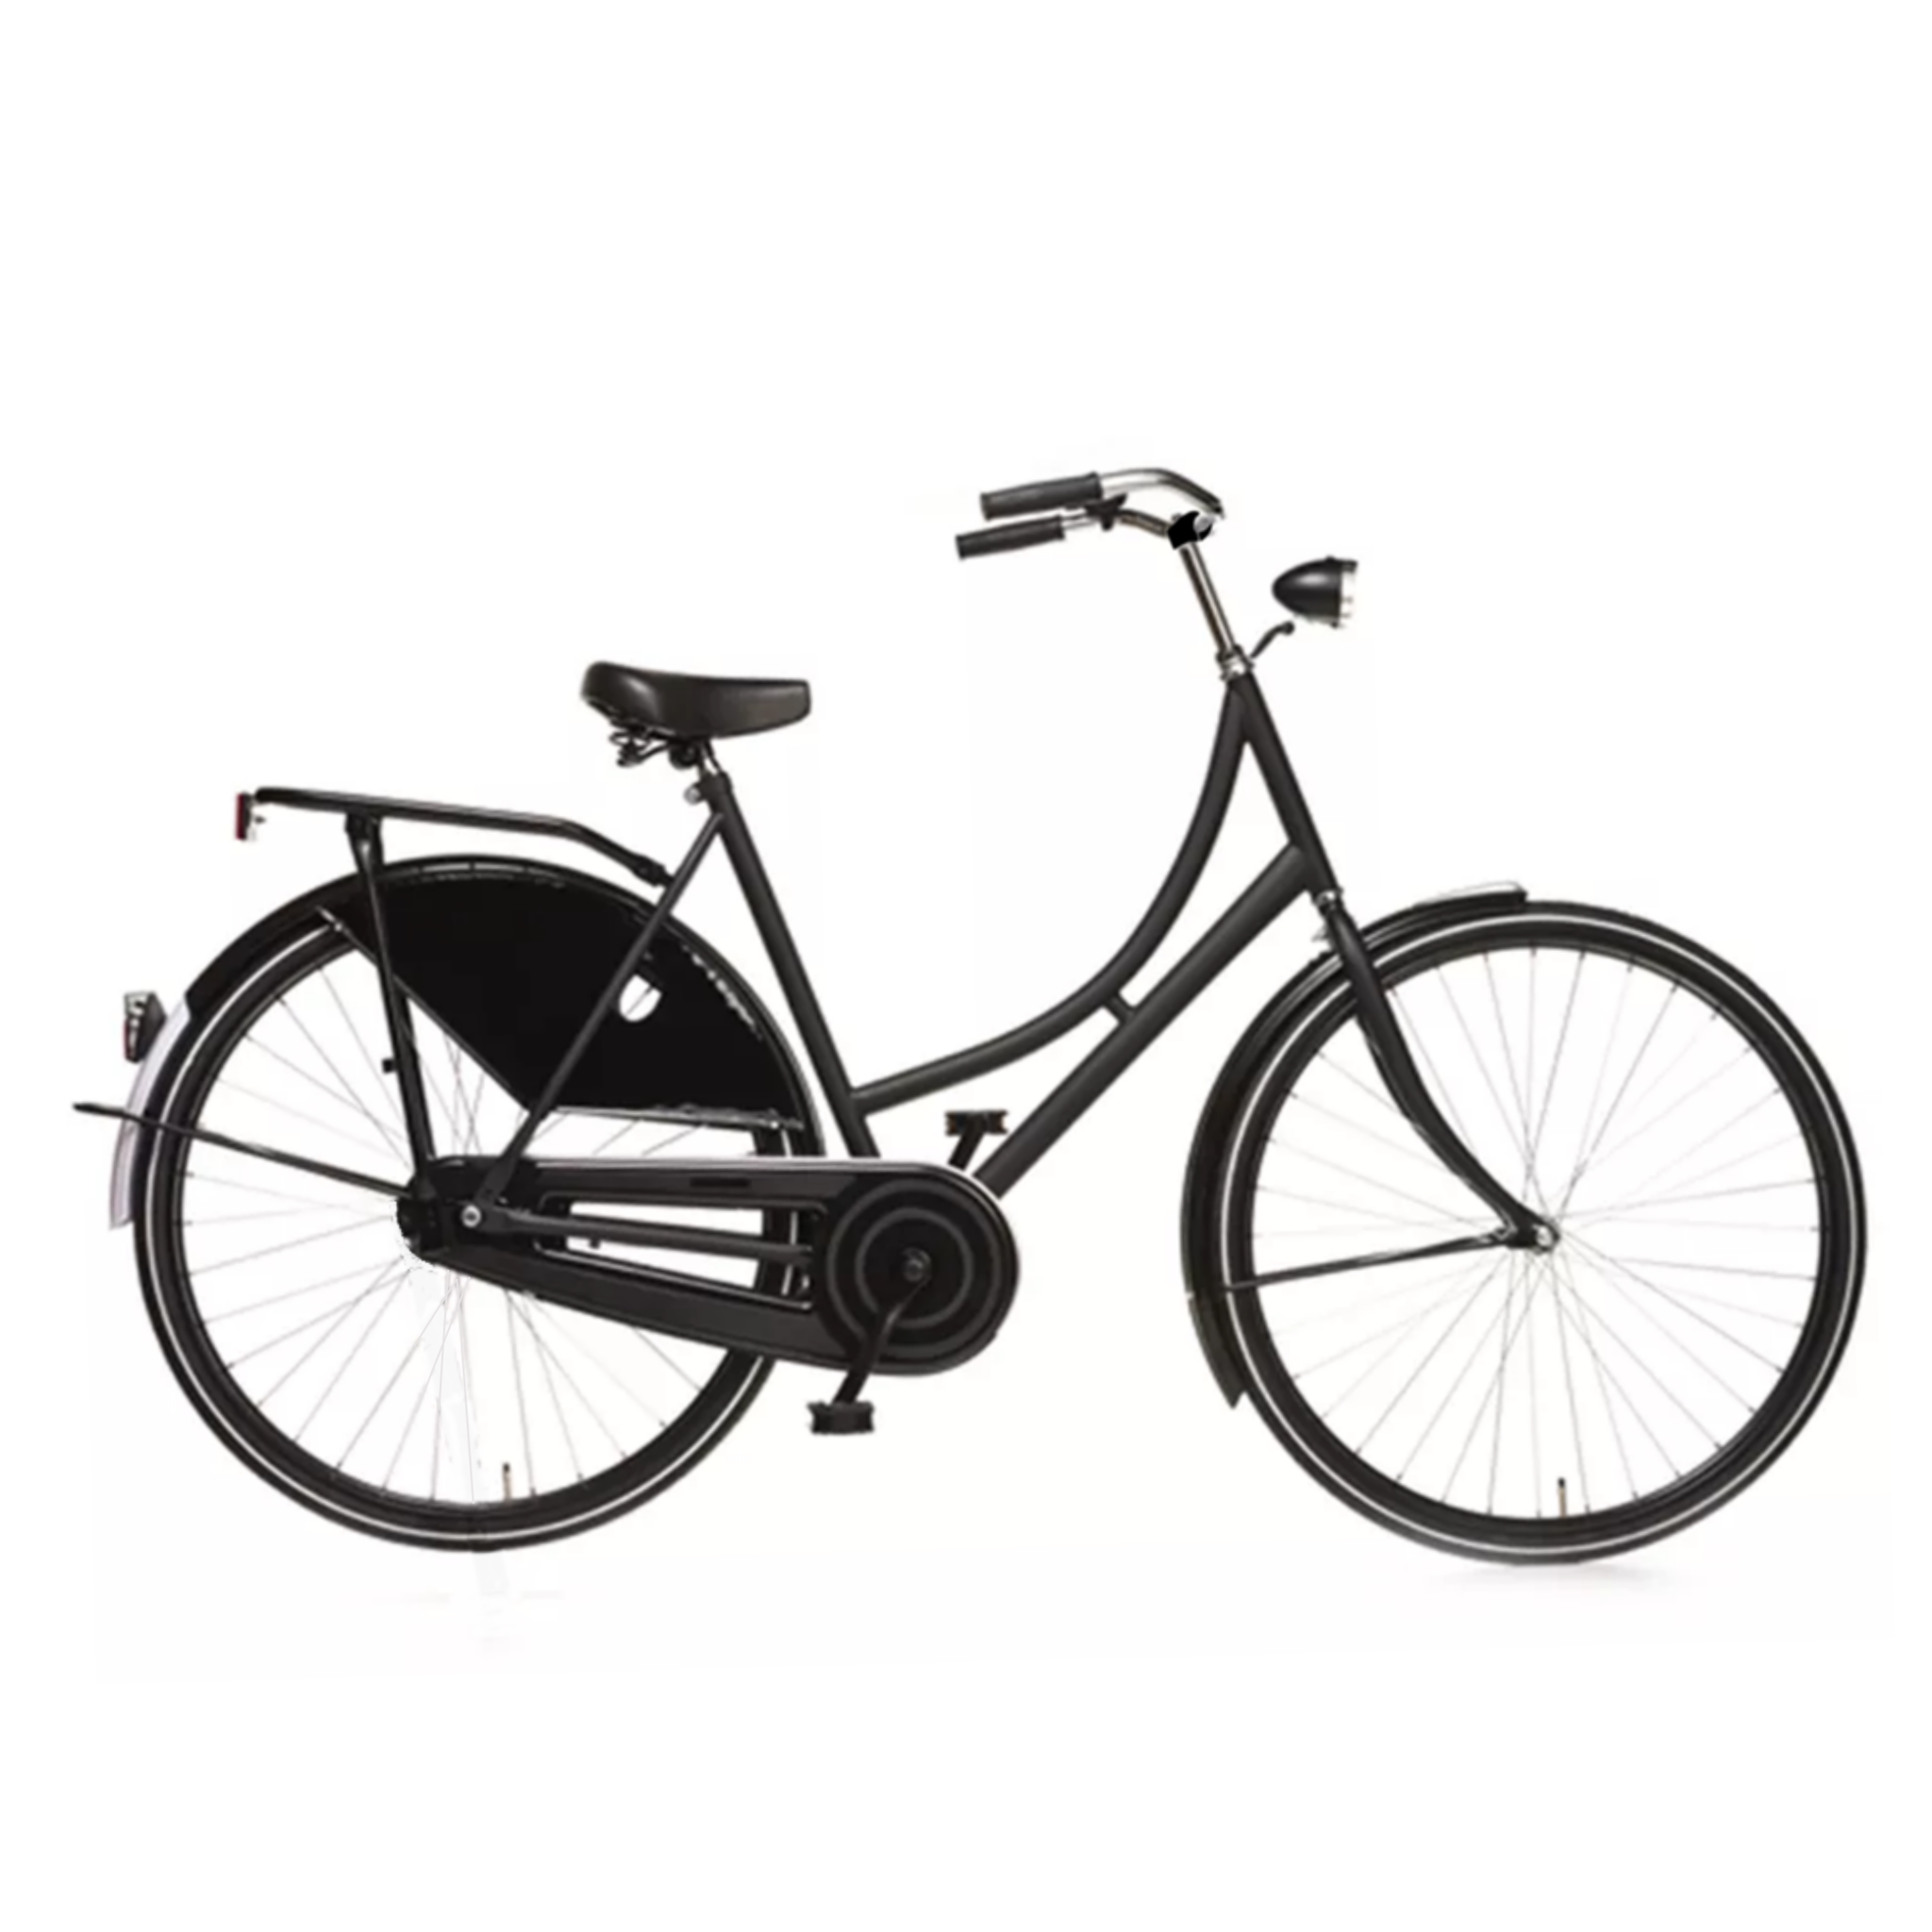 Avalon Export Omafiets 28 inch 57 cm